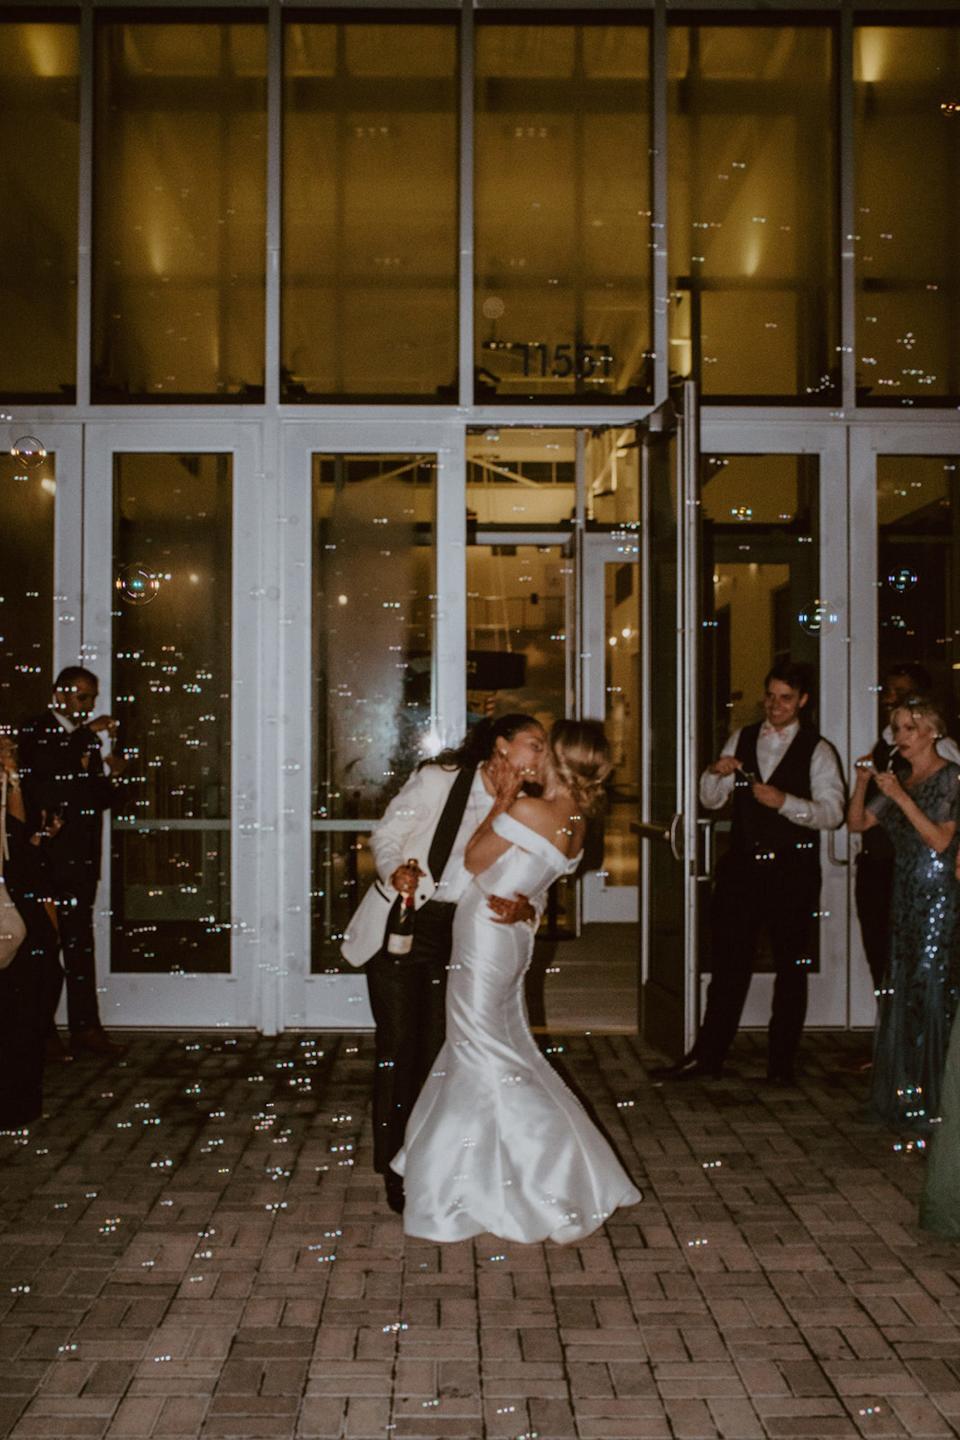 Two brides kiss as their wedding guests blow bubbles around them. One bride holds a bottle of champagne.